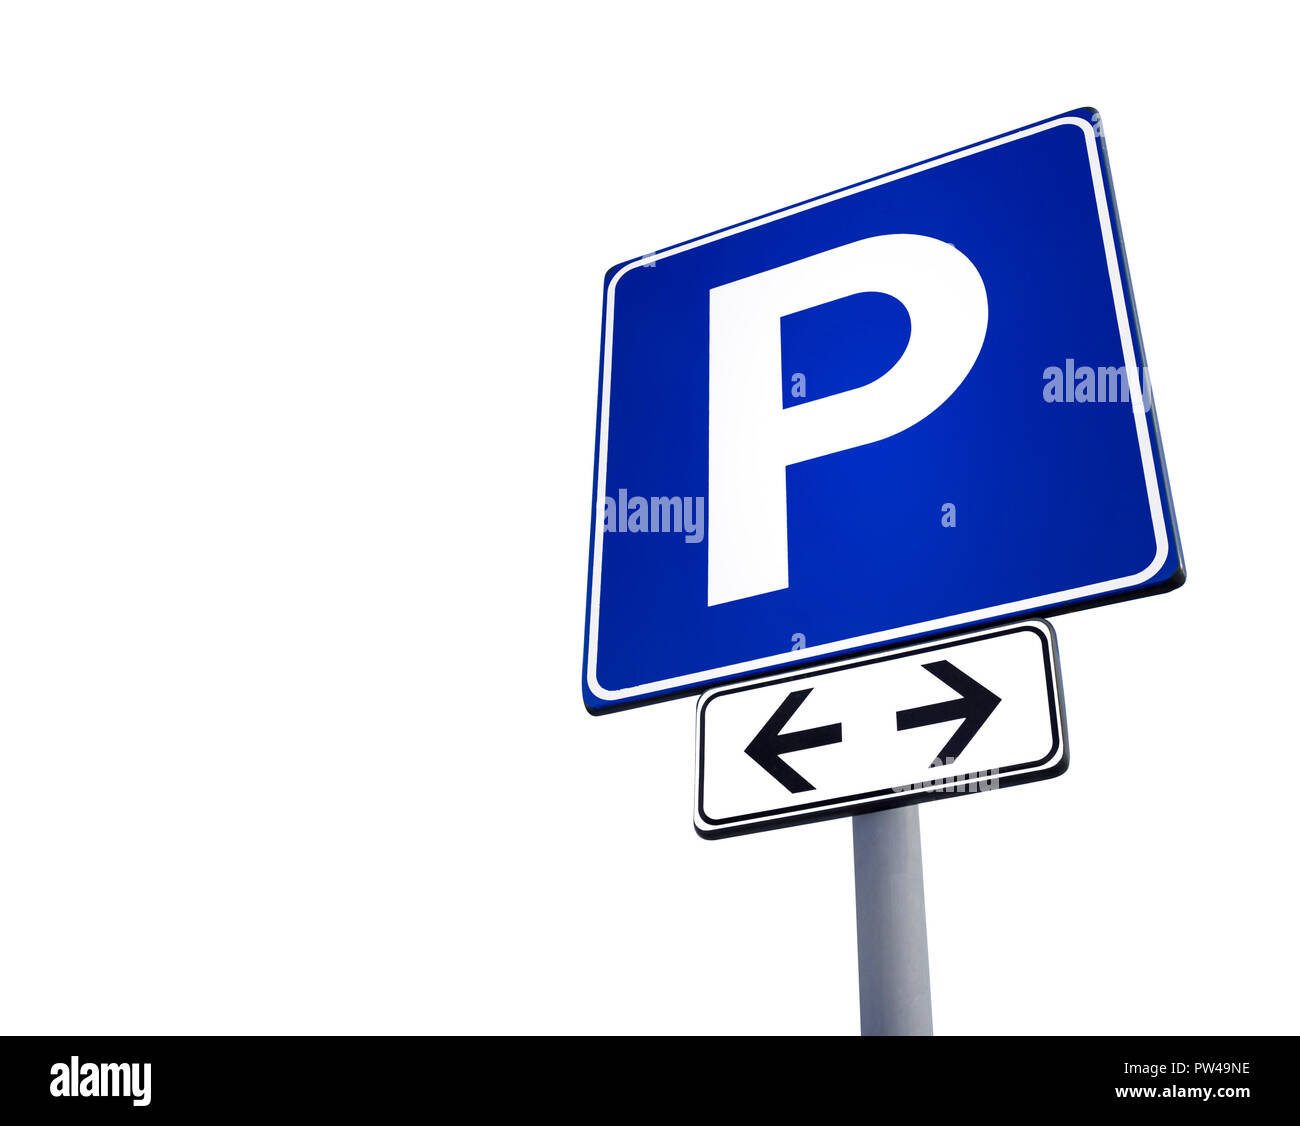 Parking sign isolated on total white background. Space for your text. Stock Photo